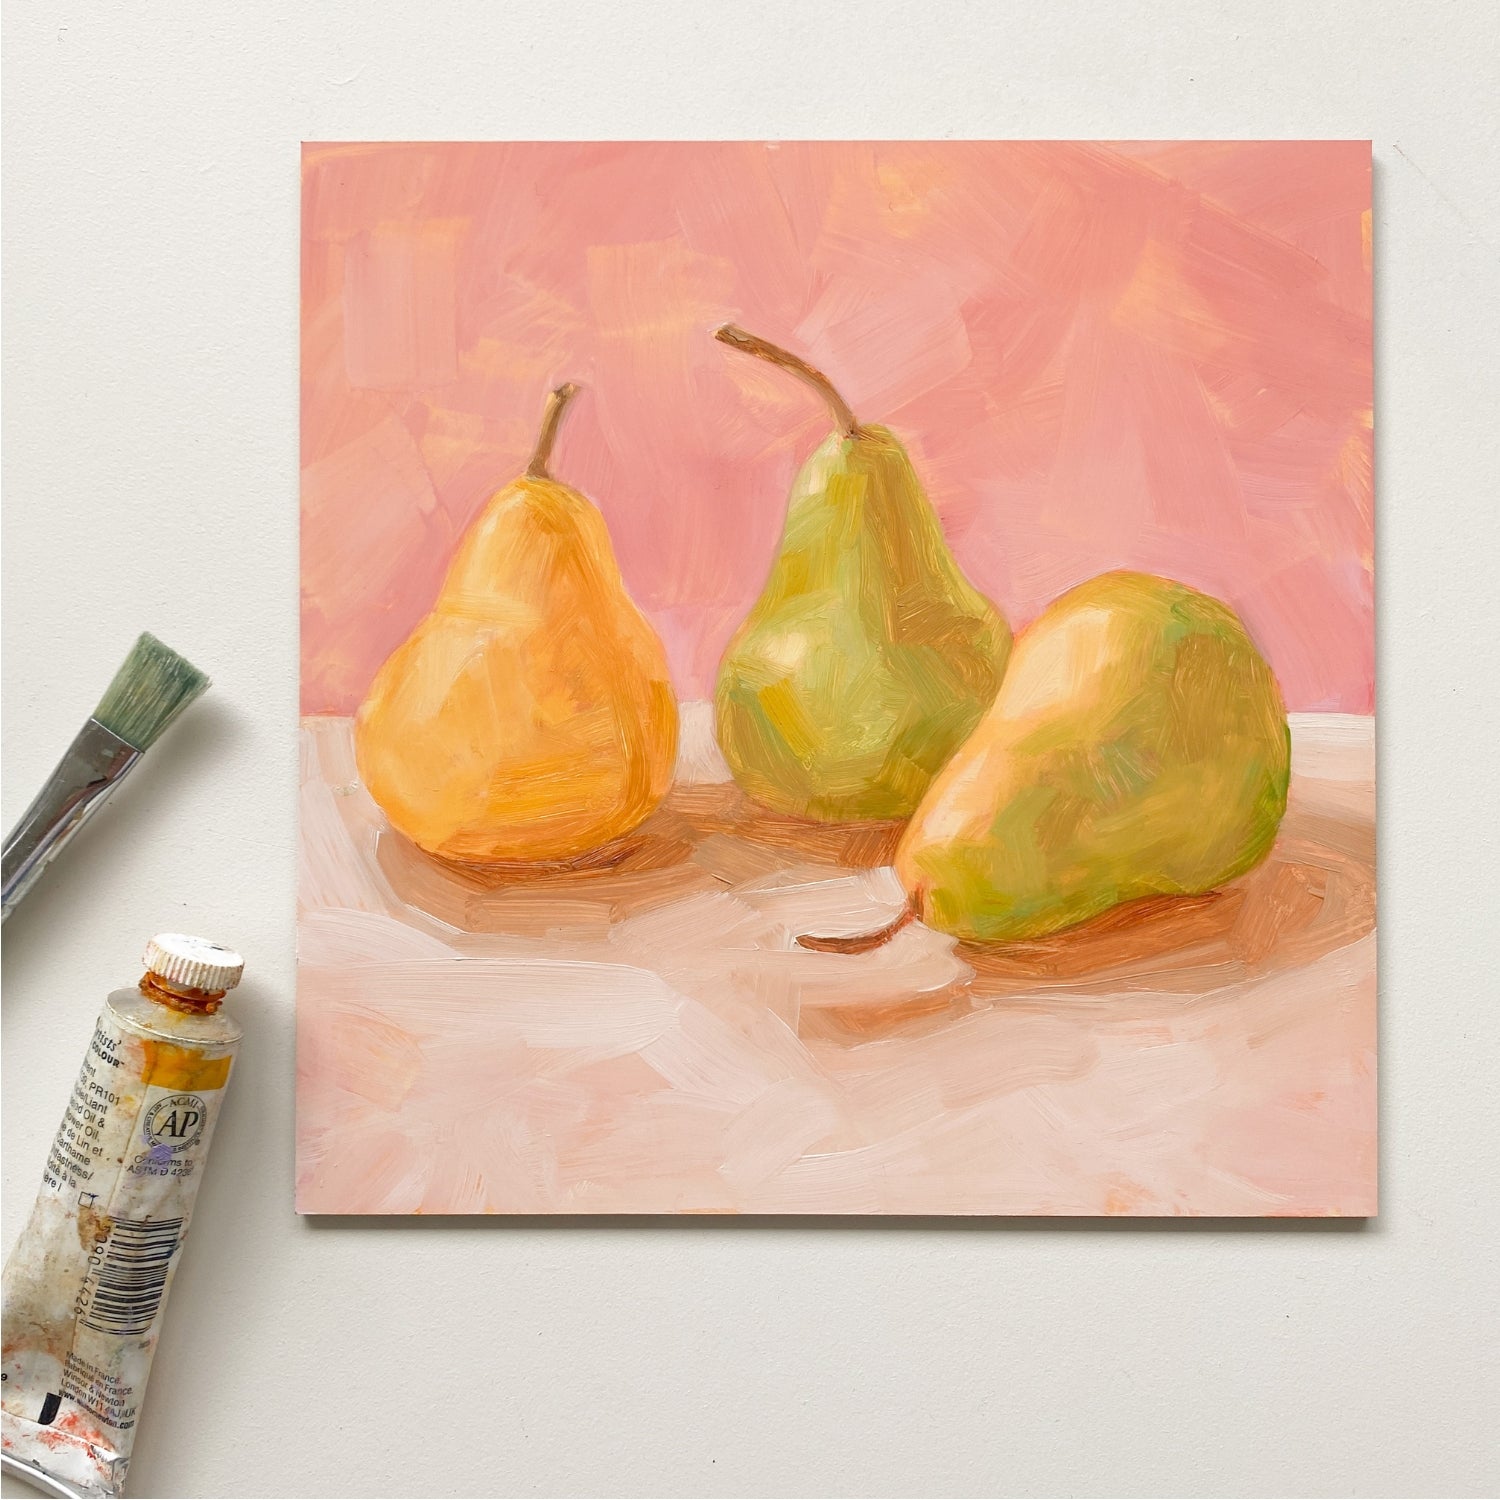 styled photo of an original oil painting of three yellow and green pears on a soft cream surface and a soft pink background painted in an impressionistic way. The painting is on a white desk and there is a paintbrush and a paint tube next to it